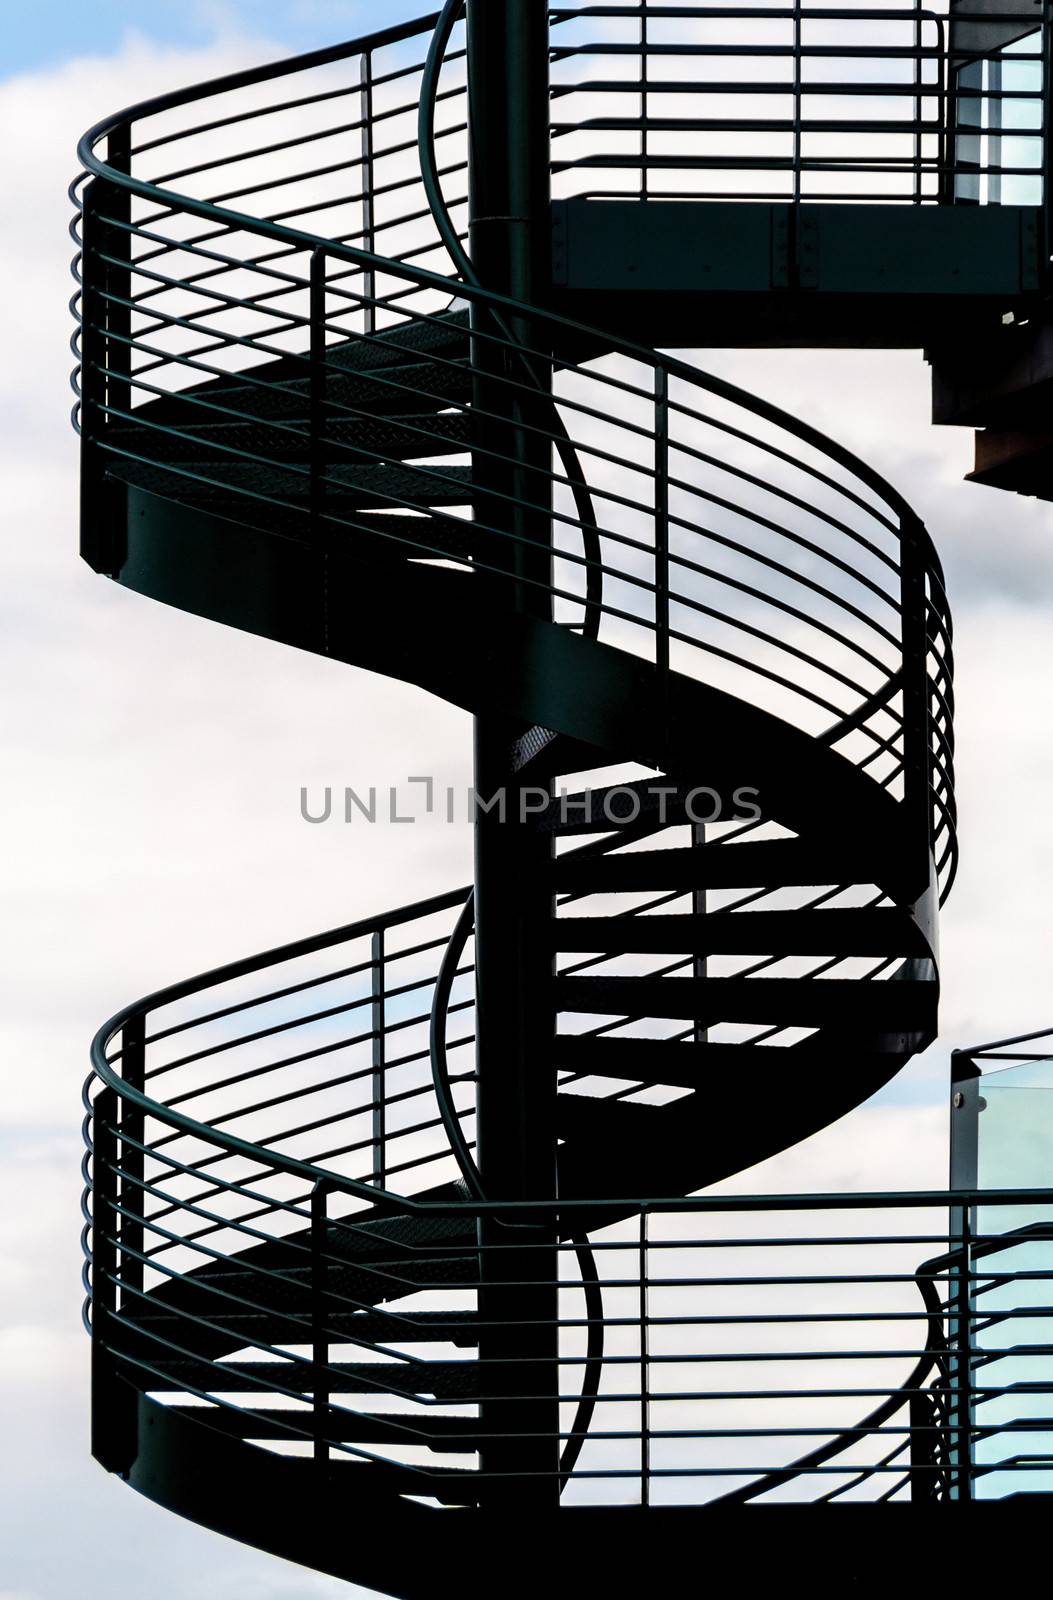 Spiral staircase and sky background